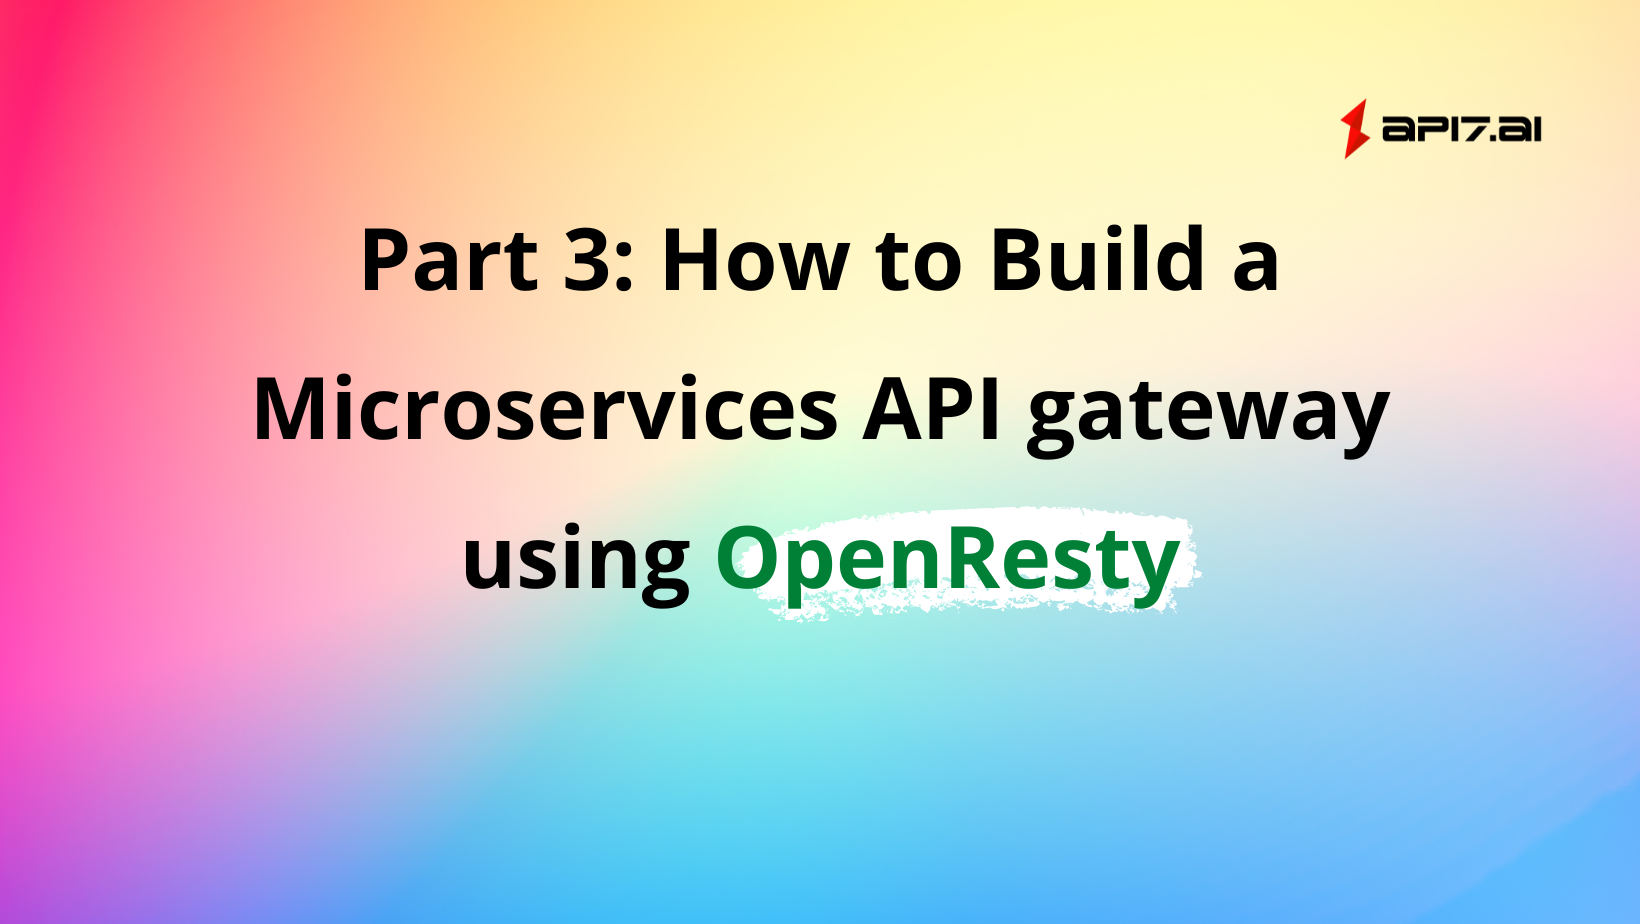 Part 3: How to Build a Microservices API Gateway Using OpenResty